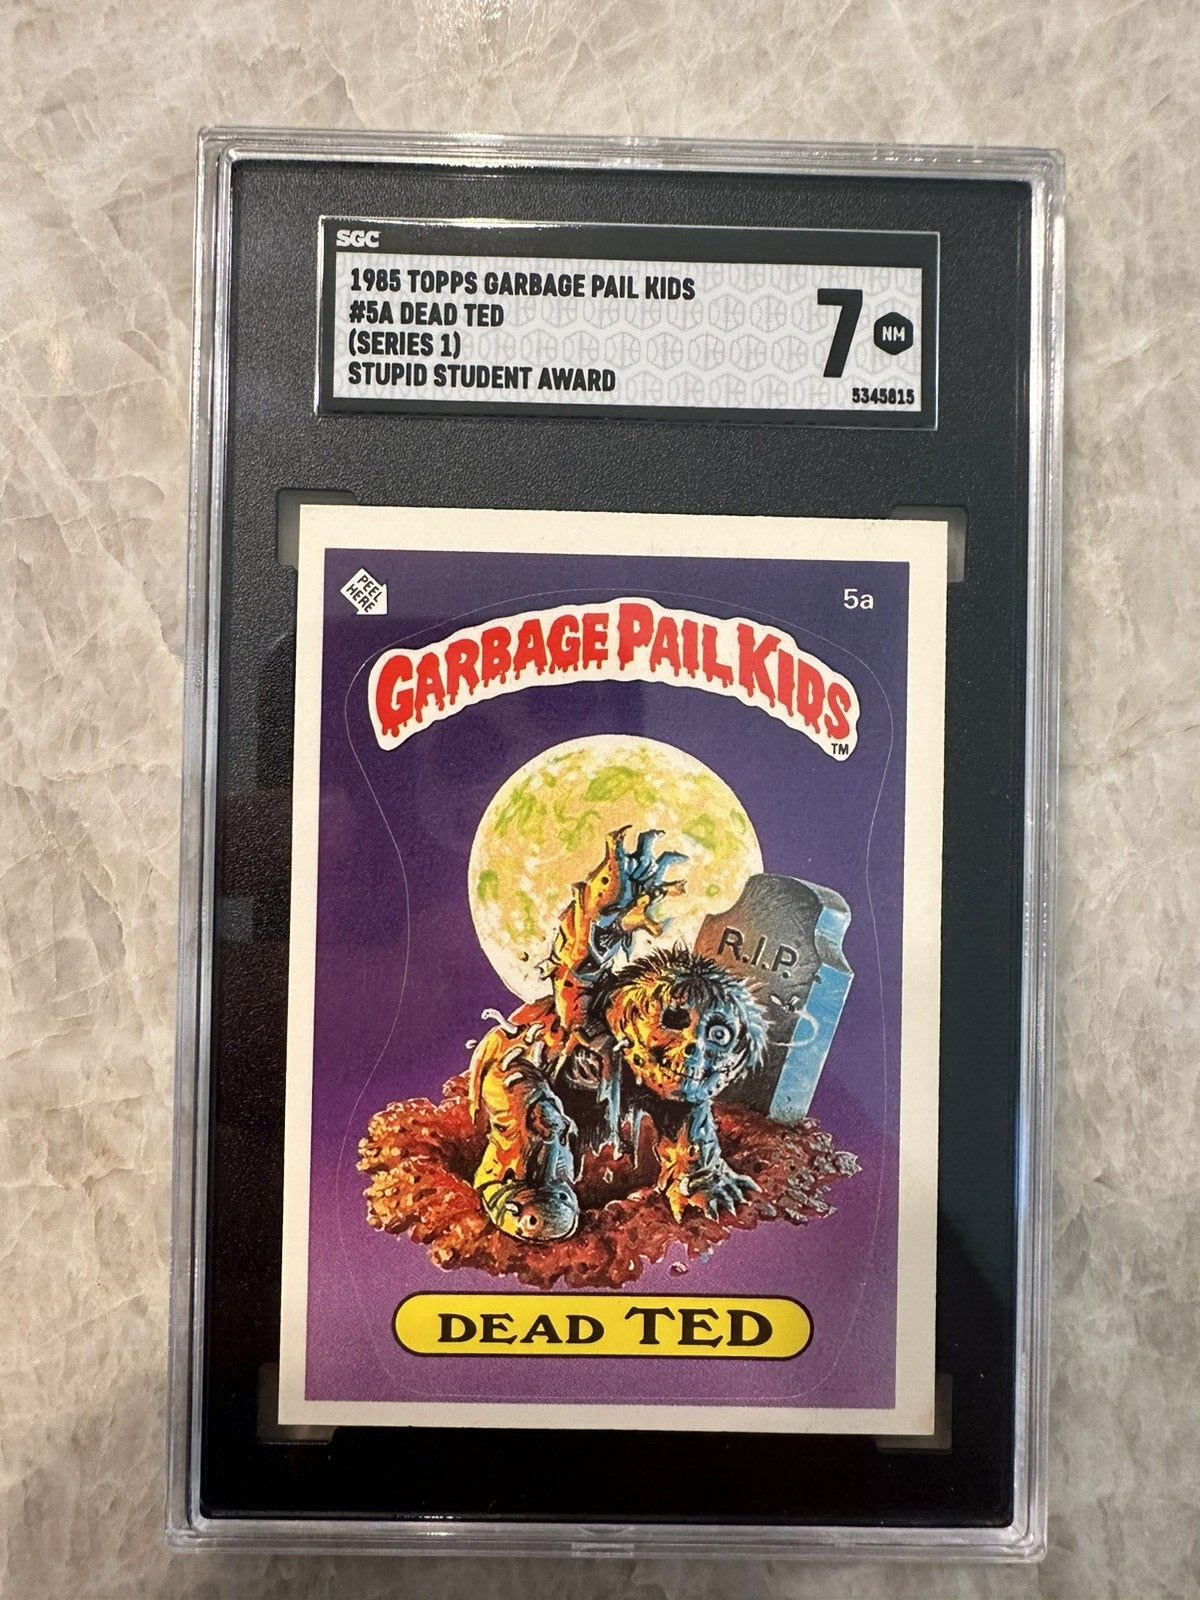 1985 Topps Garbage Pail Kids #5a Dead Ted Series 1 Trading Card SGC 7 NM Rare